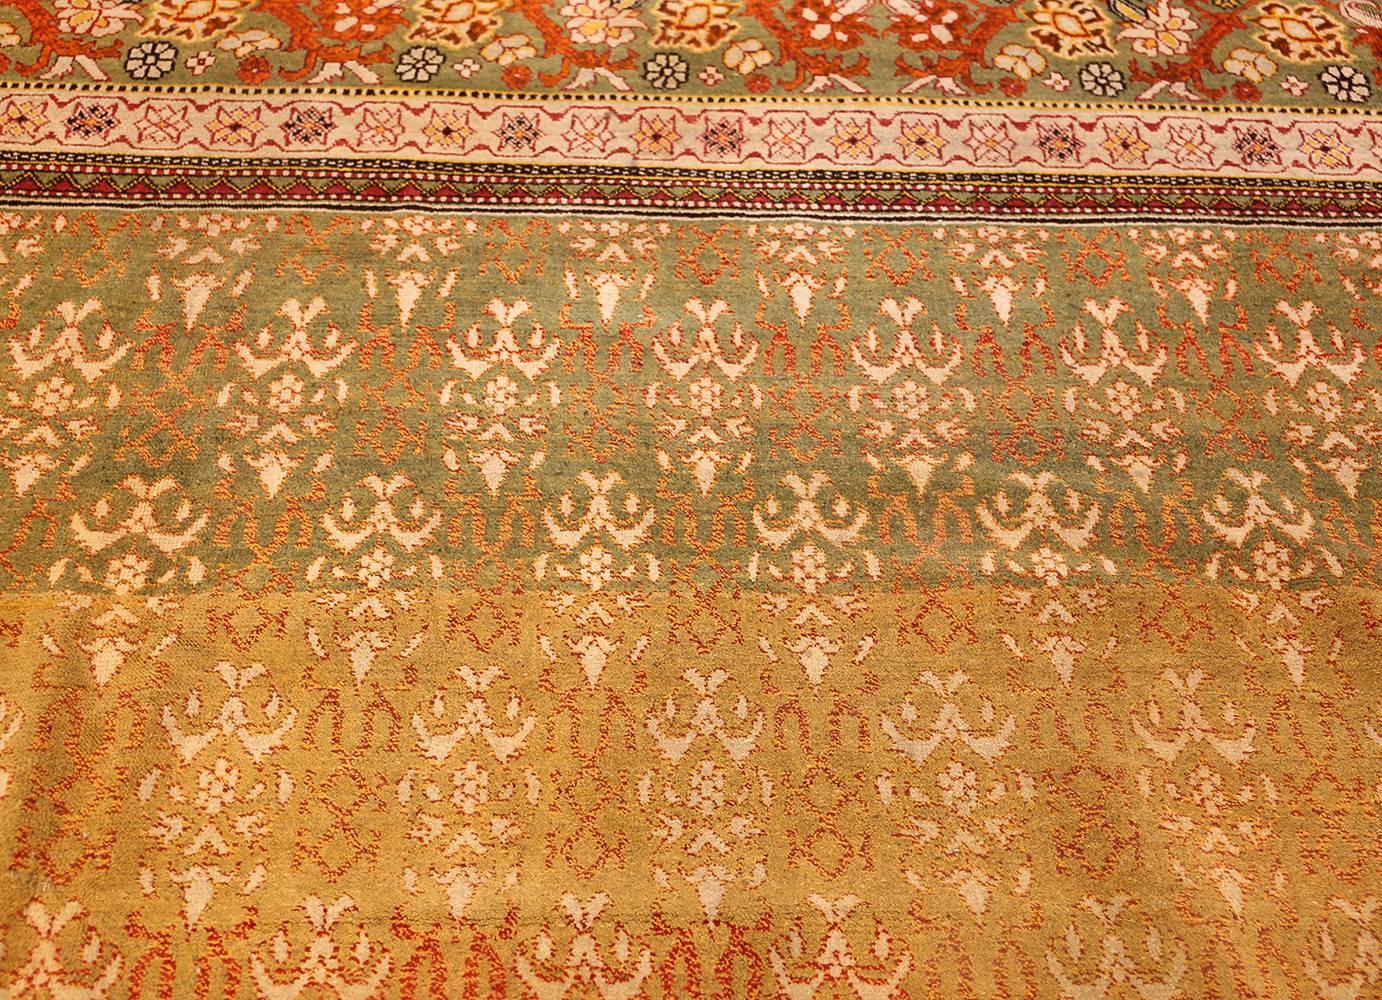 Antique Indian Agra Rug, Circa 1900 --  The location of the famed Taj Mahal, Agra is also well known for the abundant and creative production of many Indian crafts, including carpet weaving. Many of the rugs that were made in Agra, the capital of